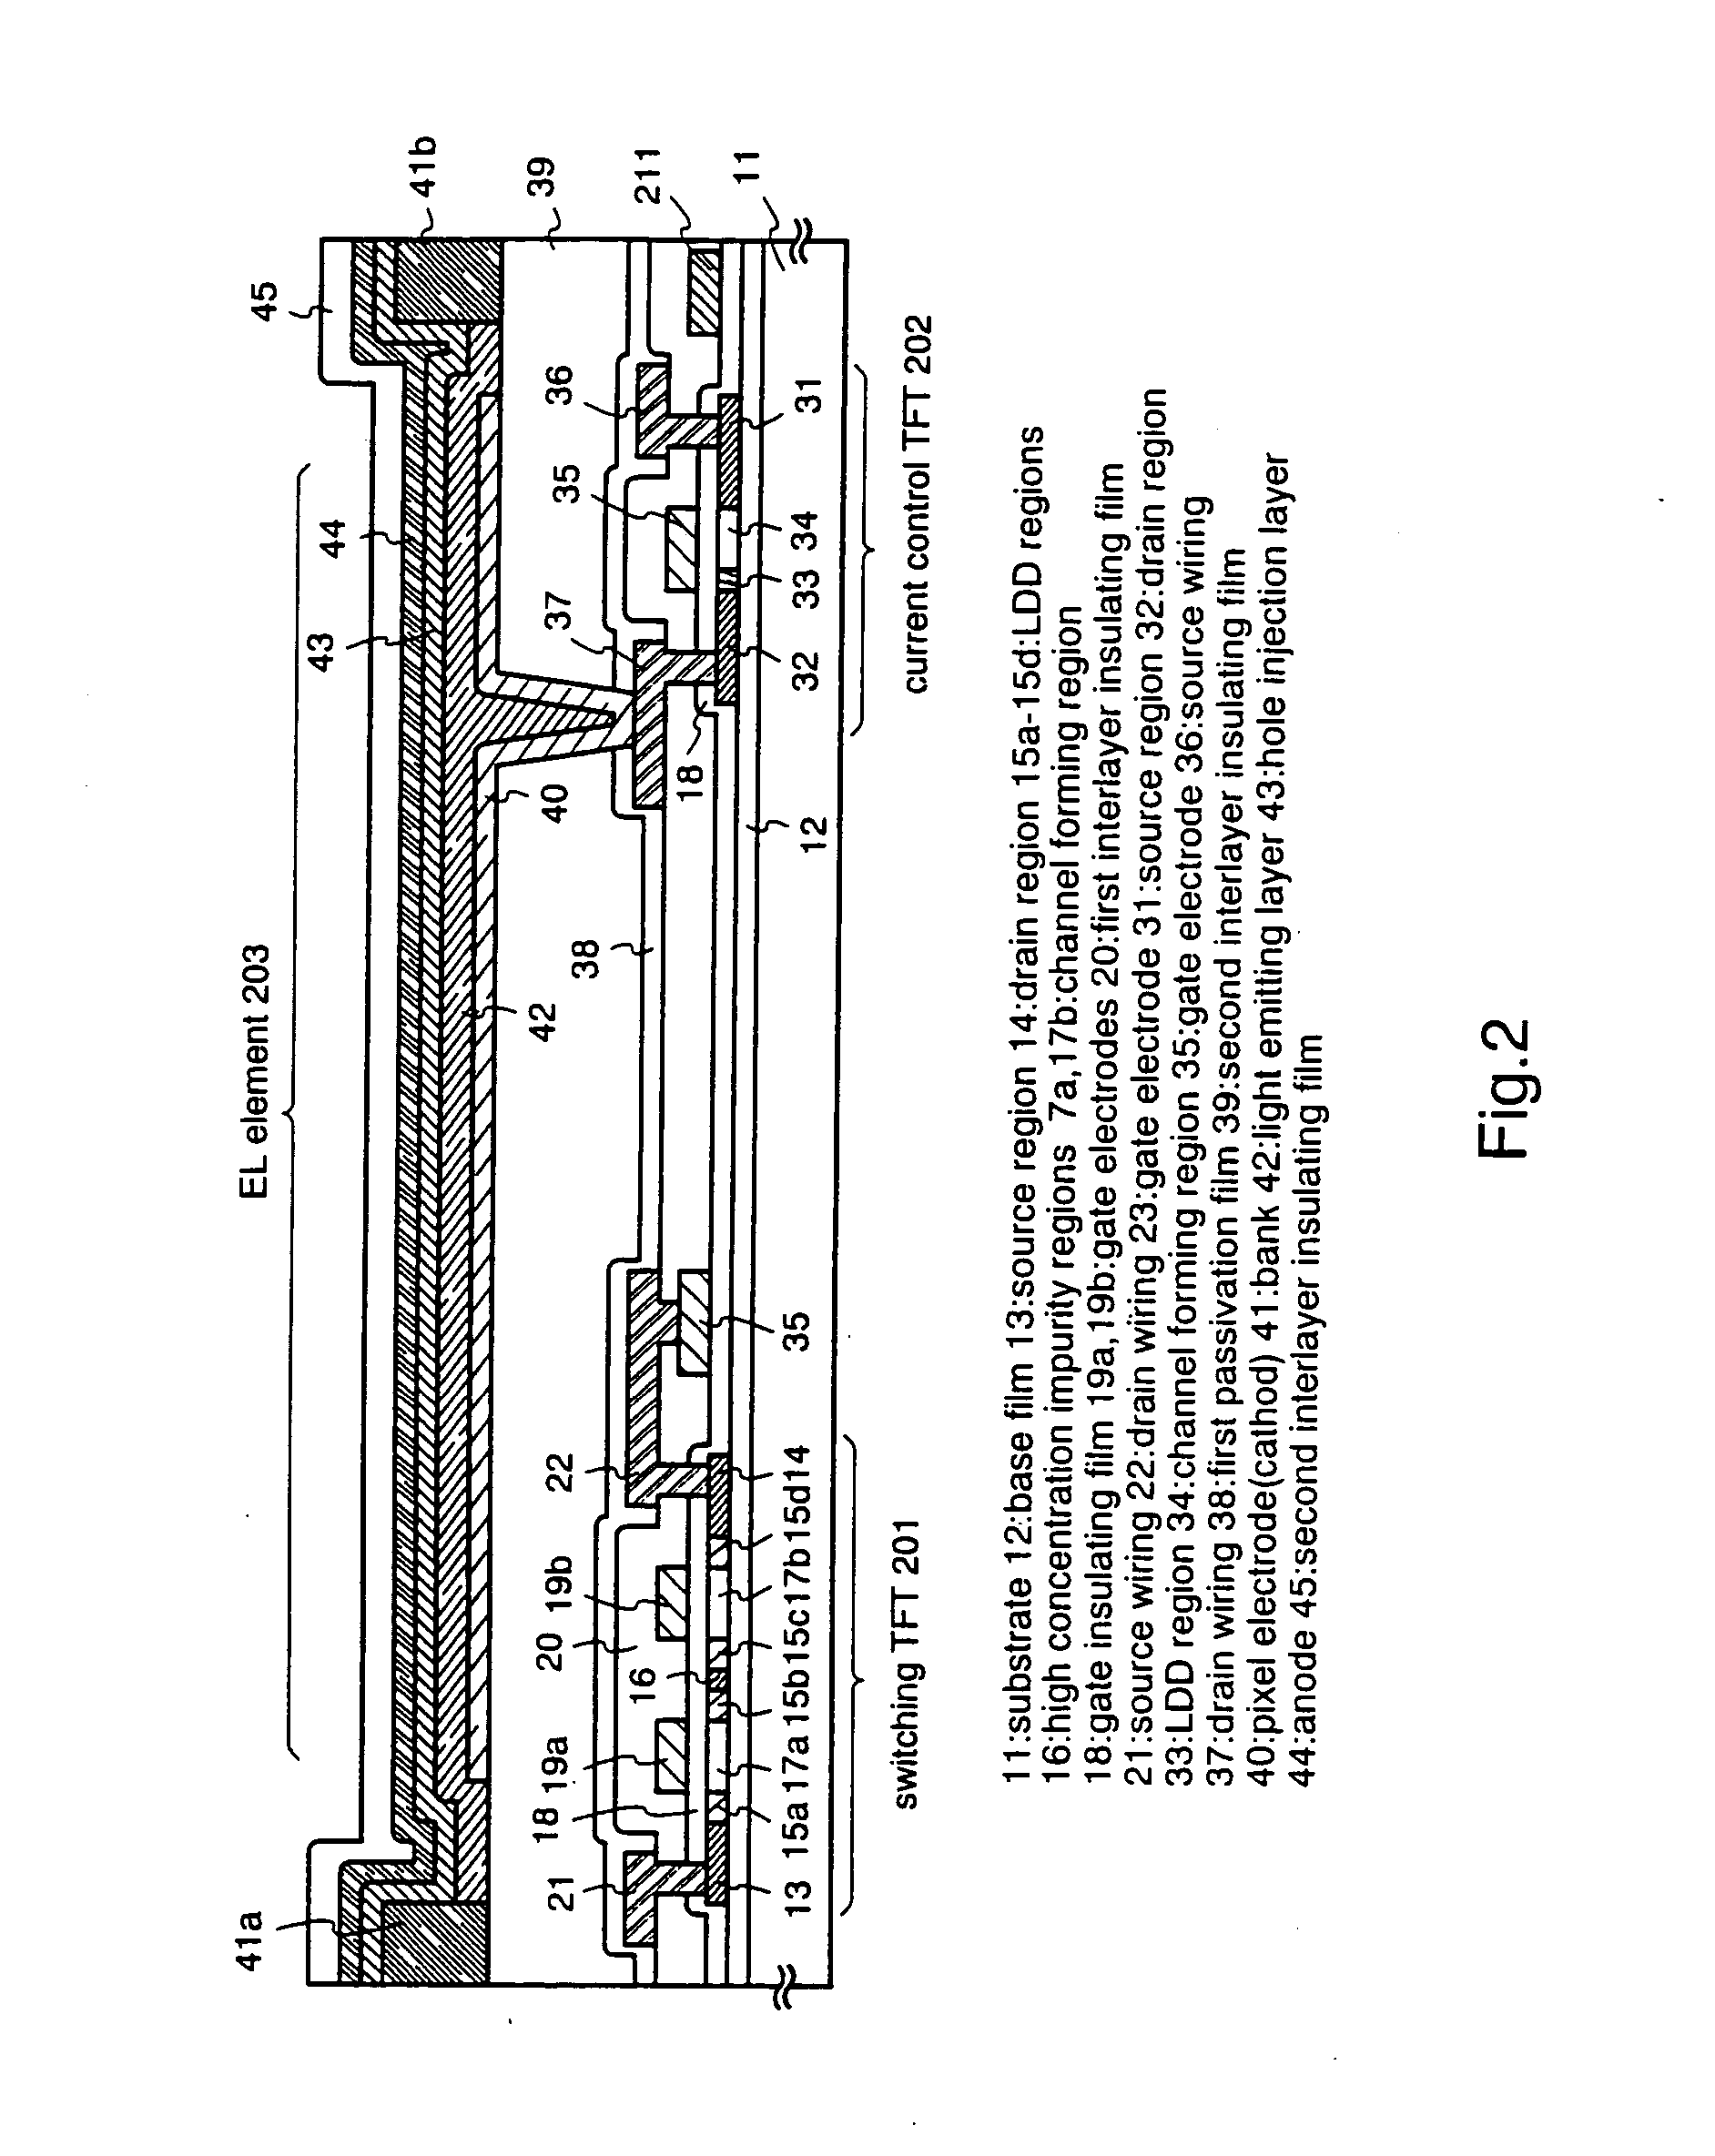 EL display device and a method of manufacturing the same